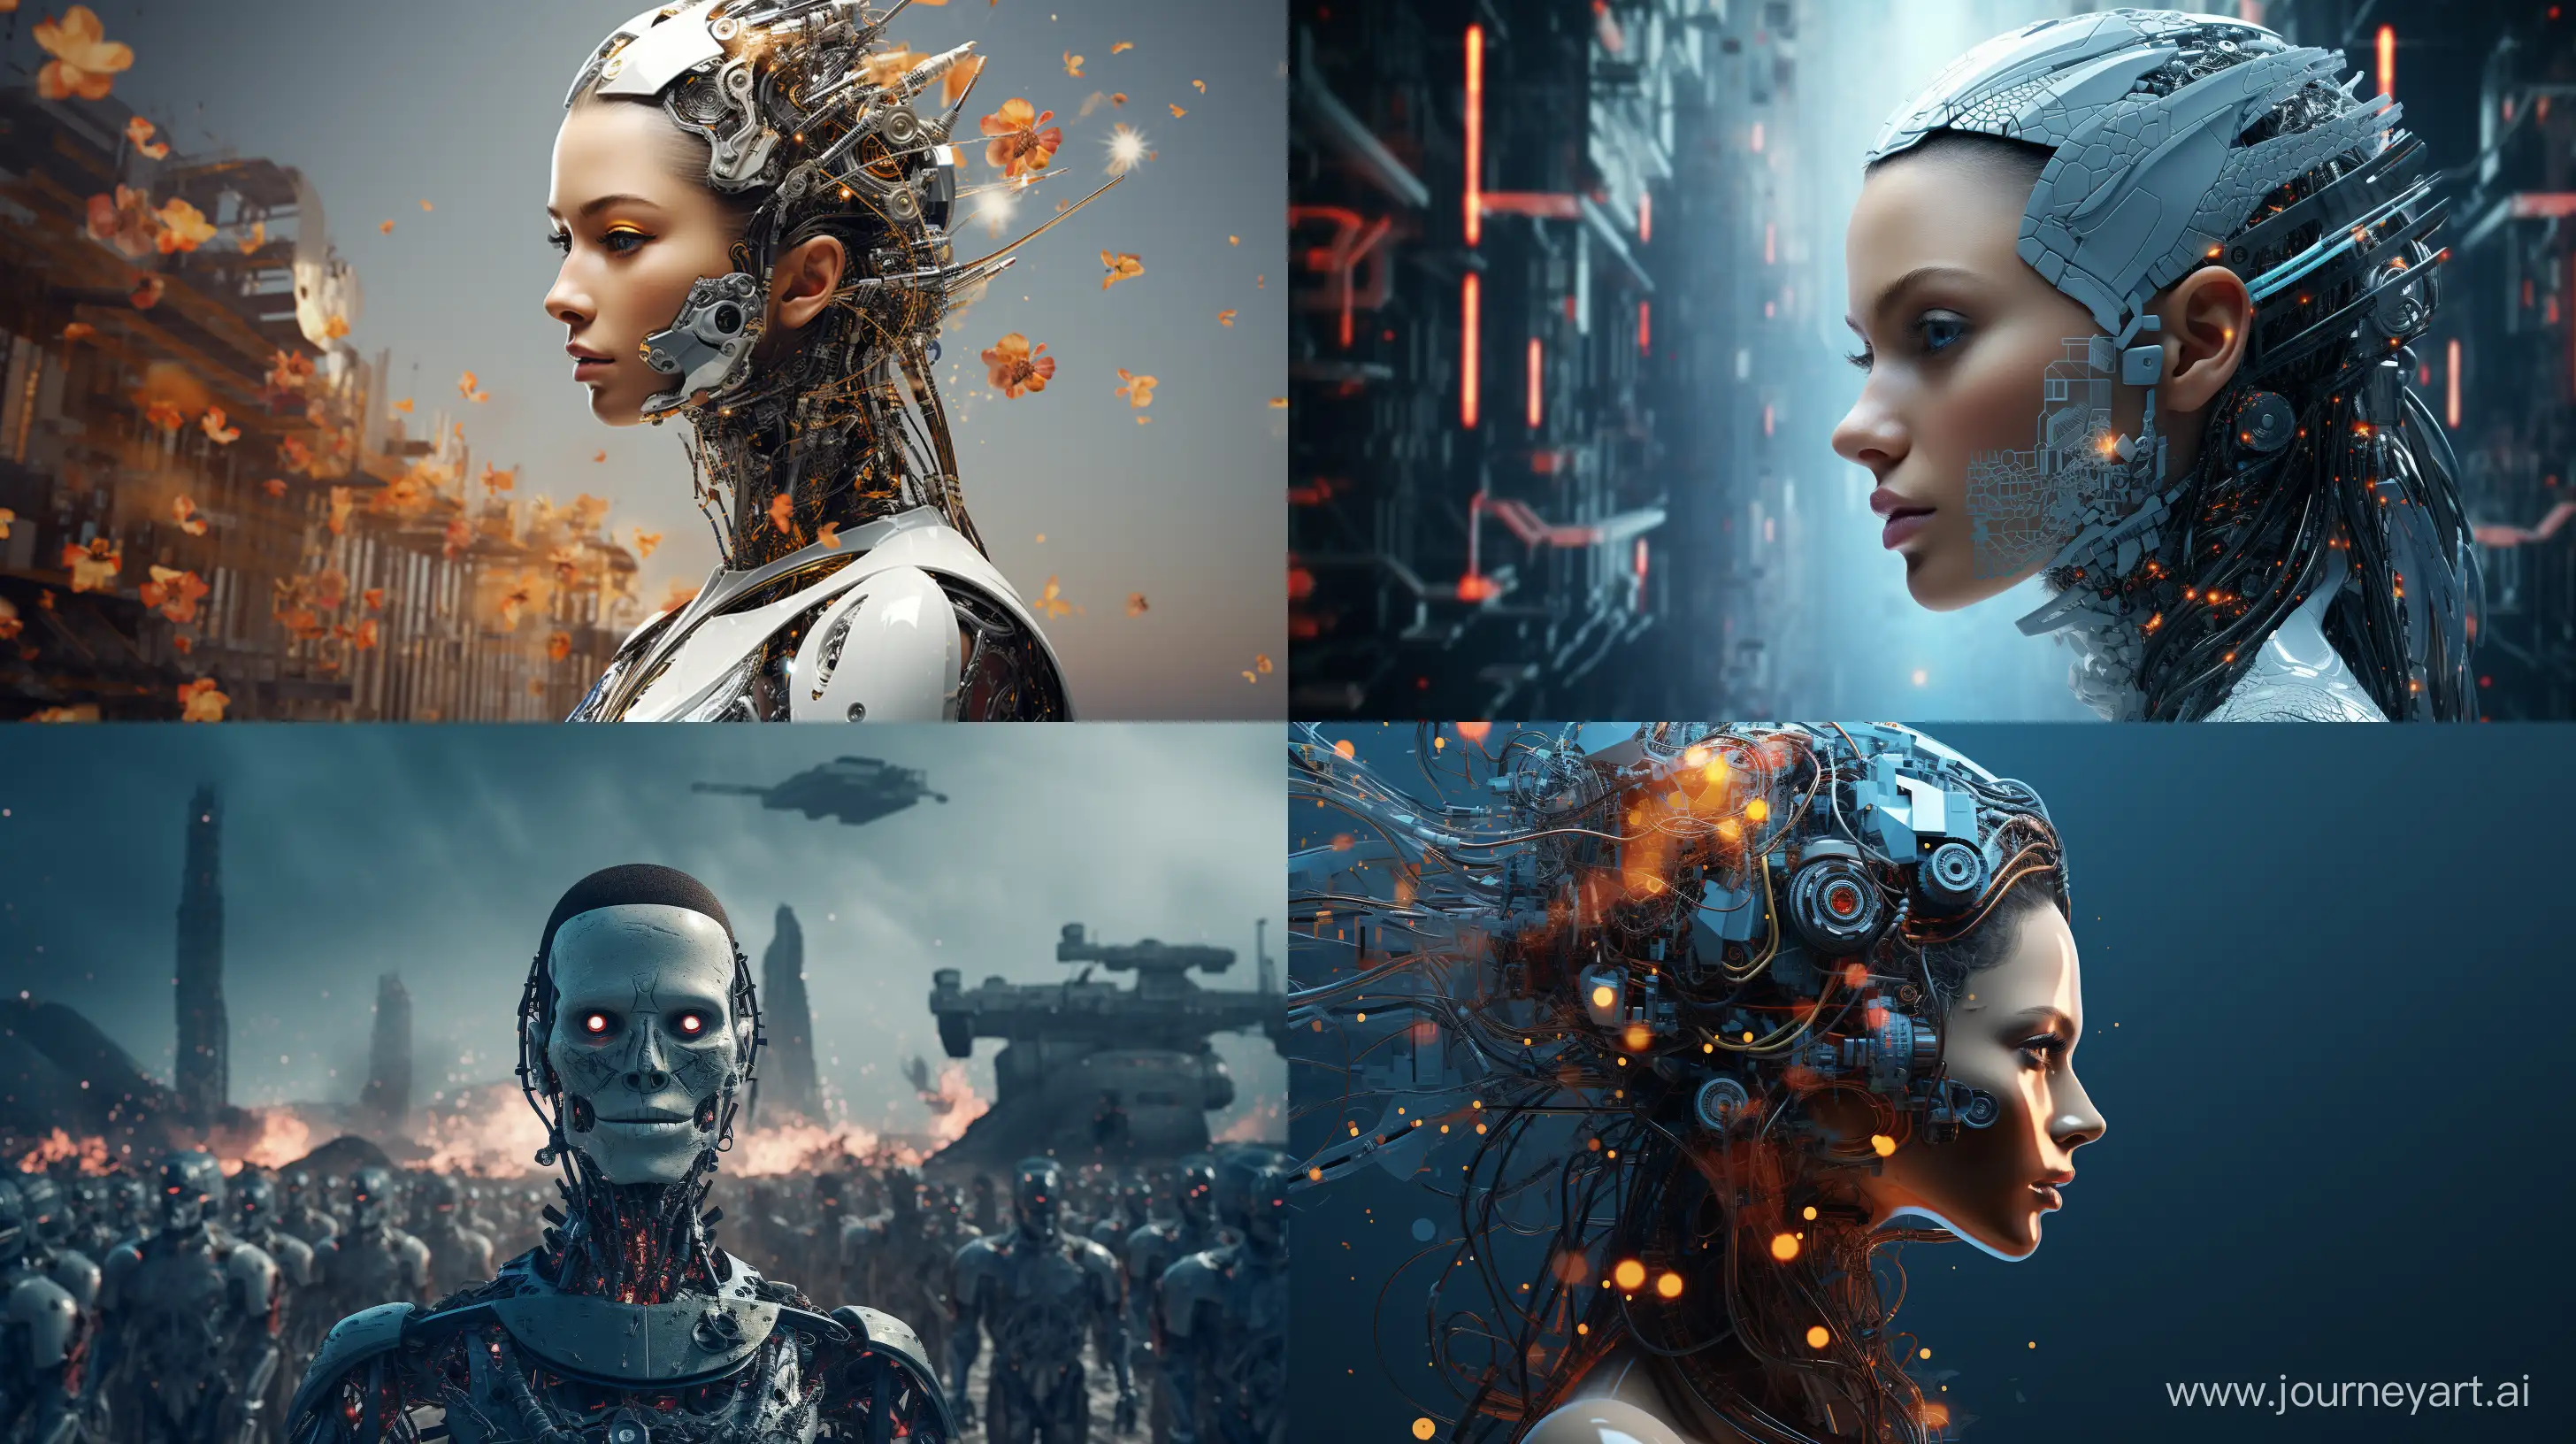 Futuristic-Artificial-General-Intelligence-Concept-in-169-and-43-Aspect-Ratios